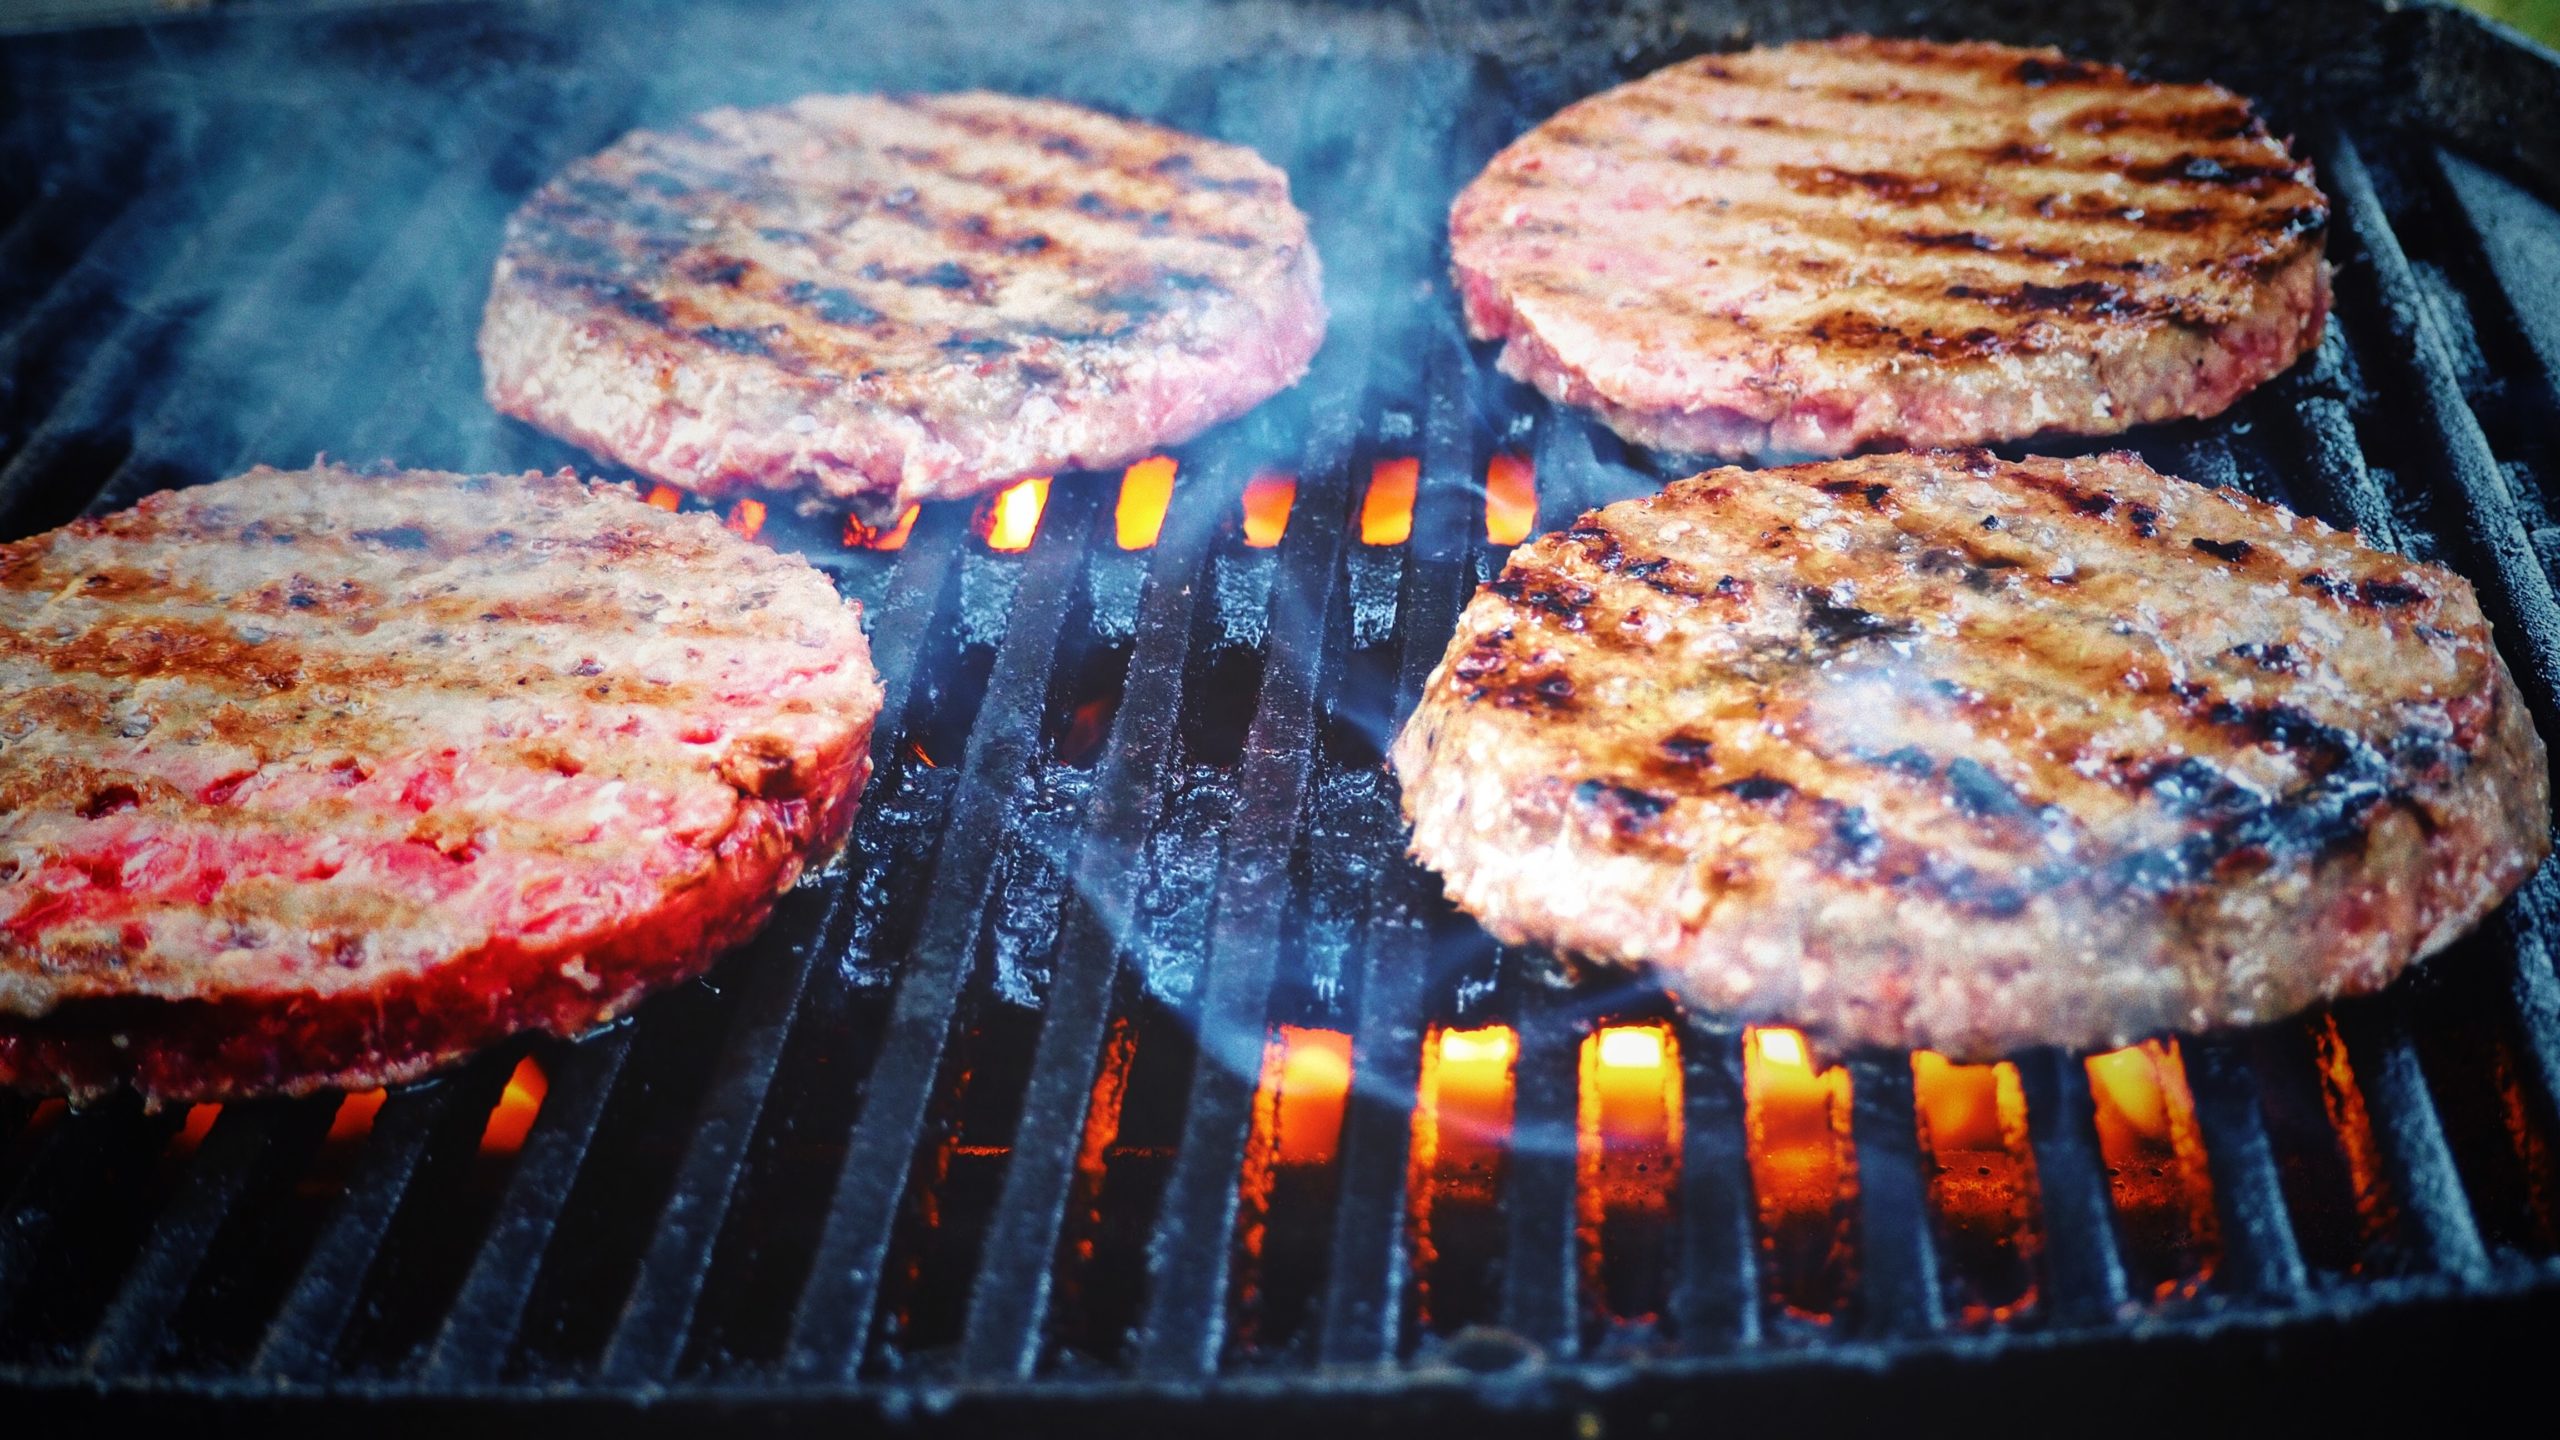 How to Grill Burgers Well